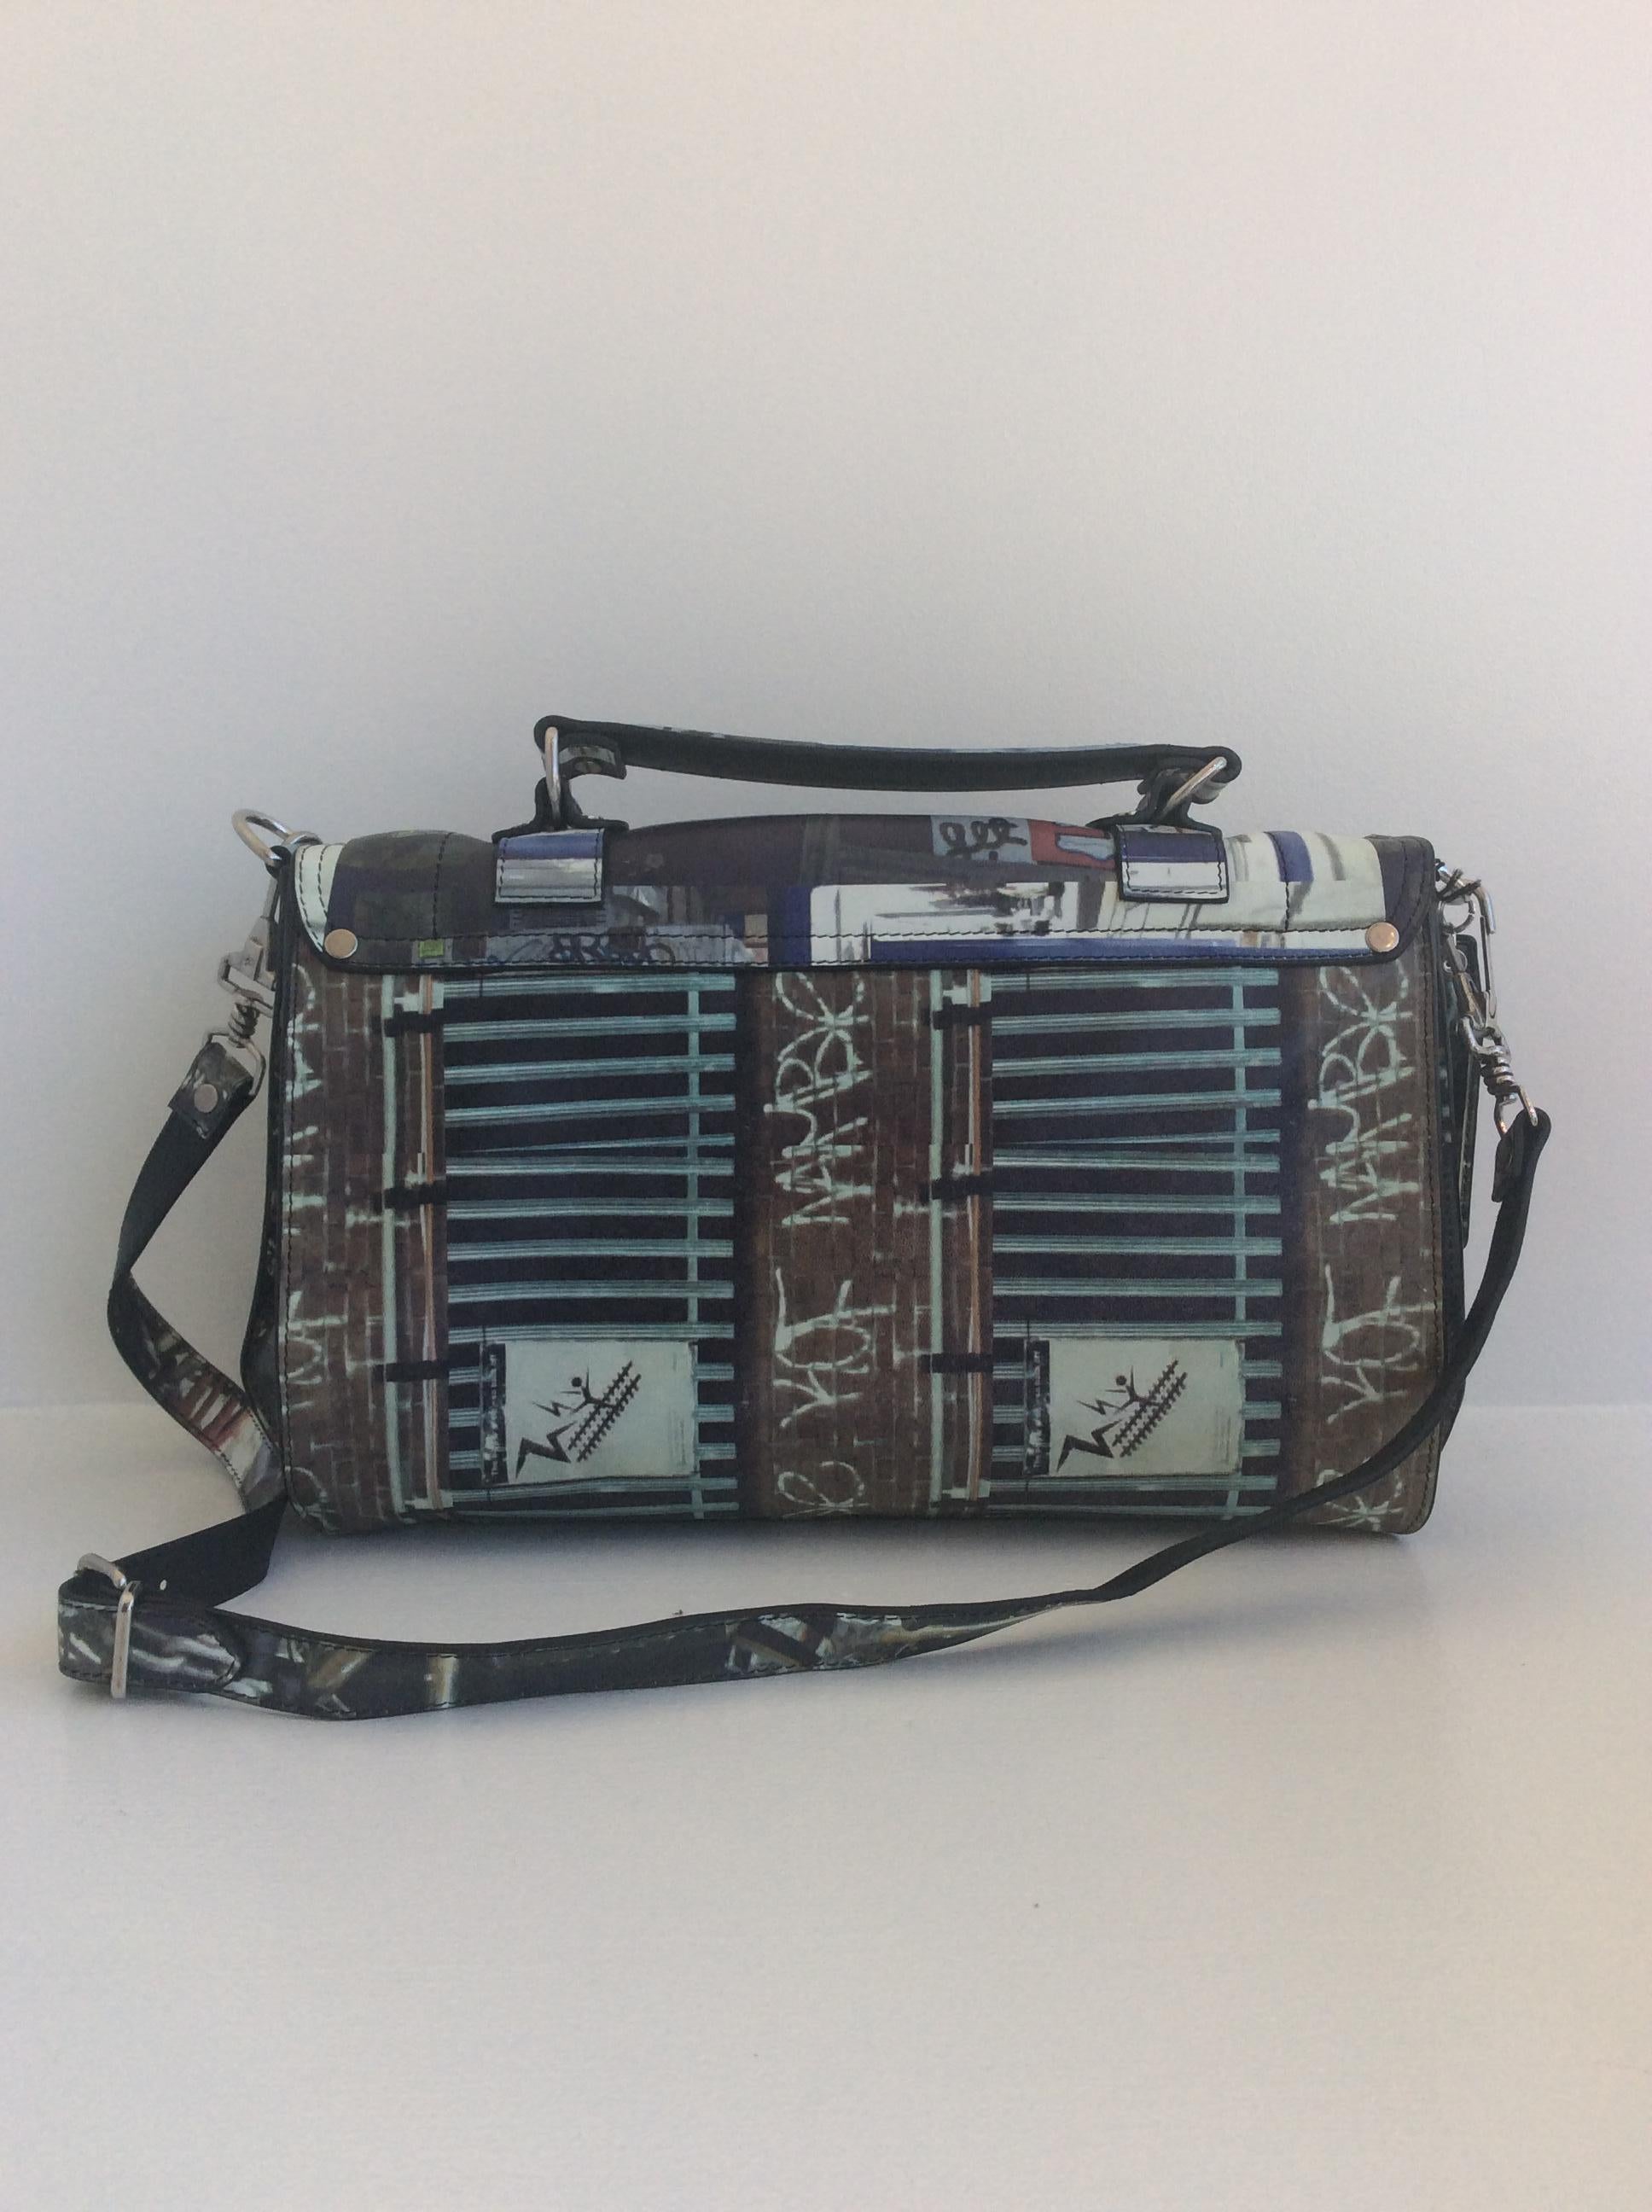 Proenza Schouler spring summer 2013 graffiti print purse with silver buckle and removable shoulder strap with inside zip pocket and separate front compartment. This is brand new with tags.